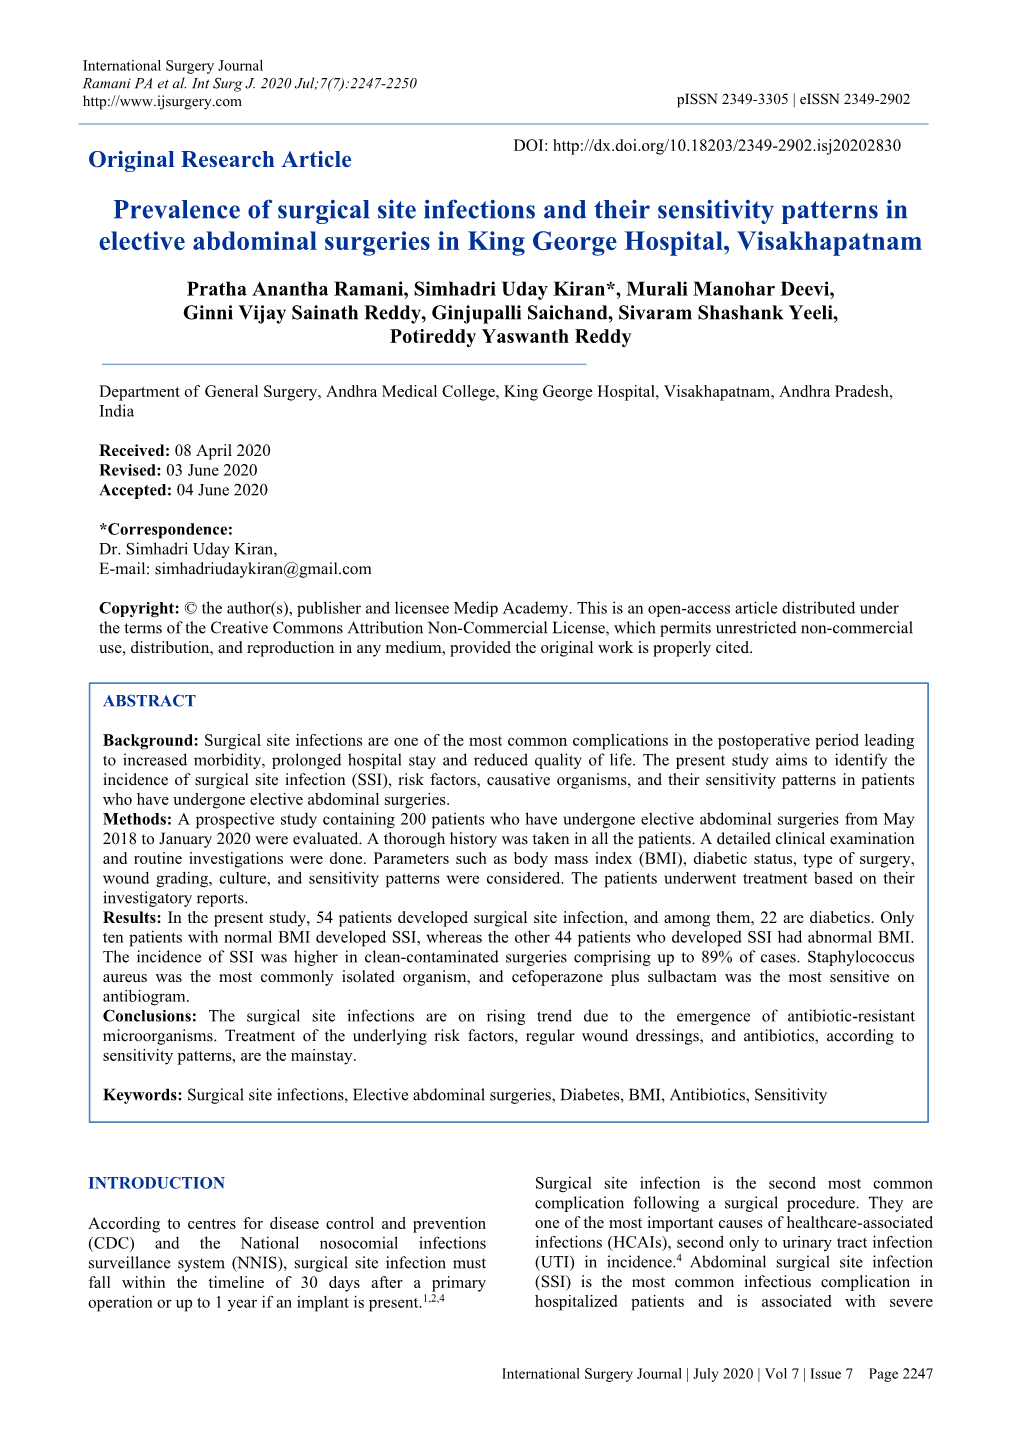 Prevalence of Surgical Site Infections and Their Sensitivity Patterns in Elective Abdominal Surgeries in King George Hospital, Visakhapatnam